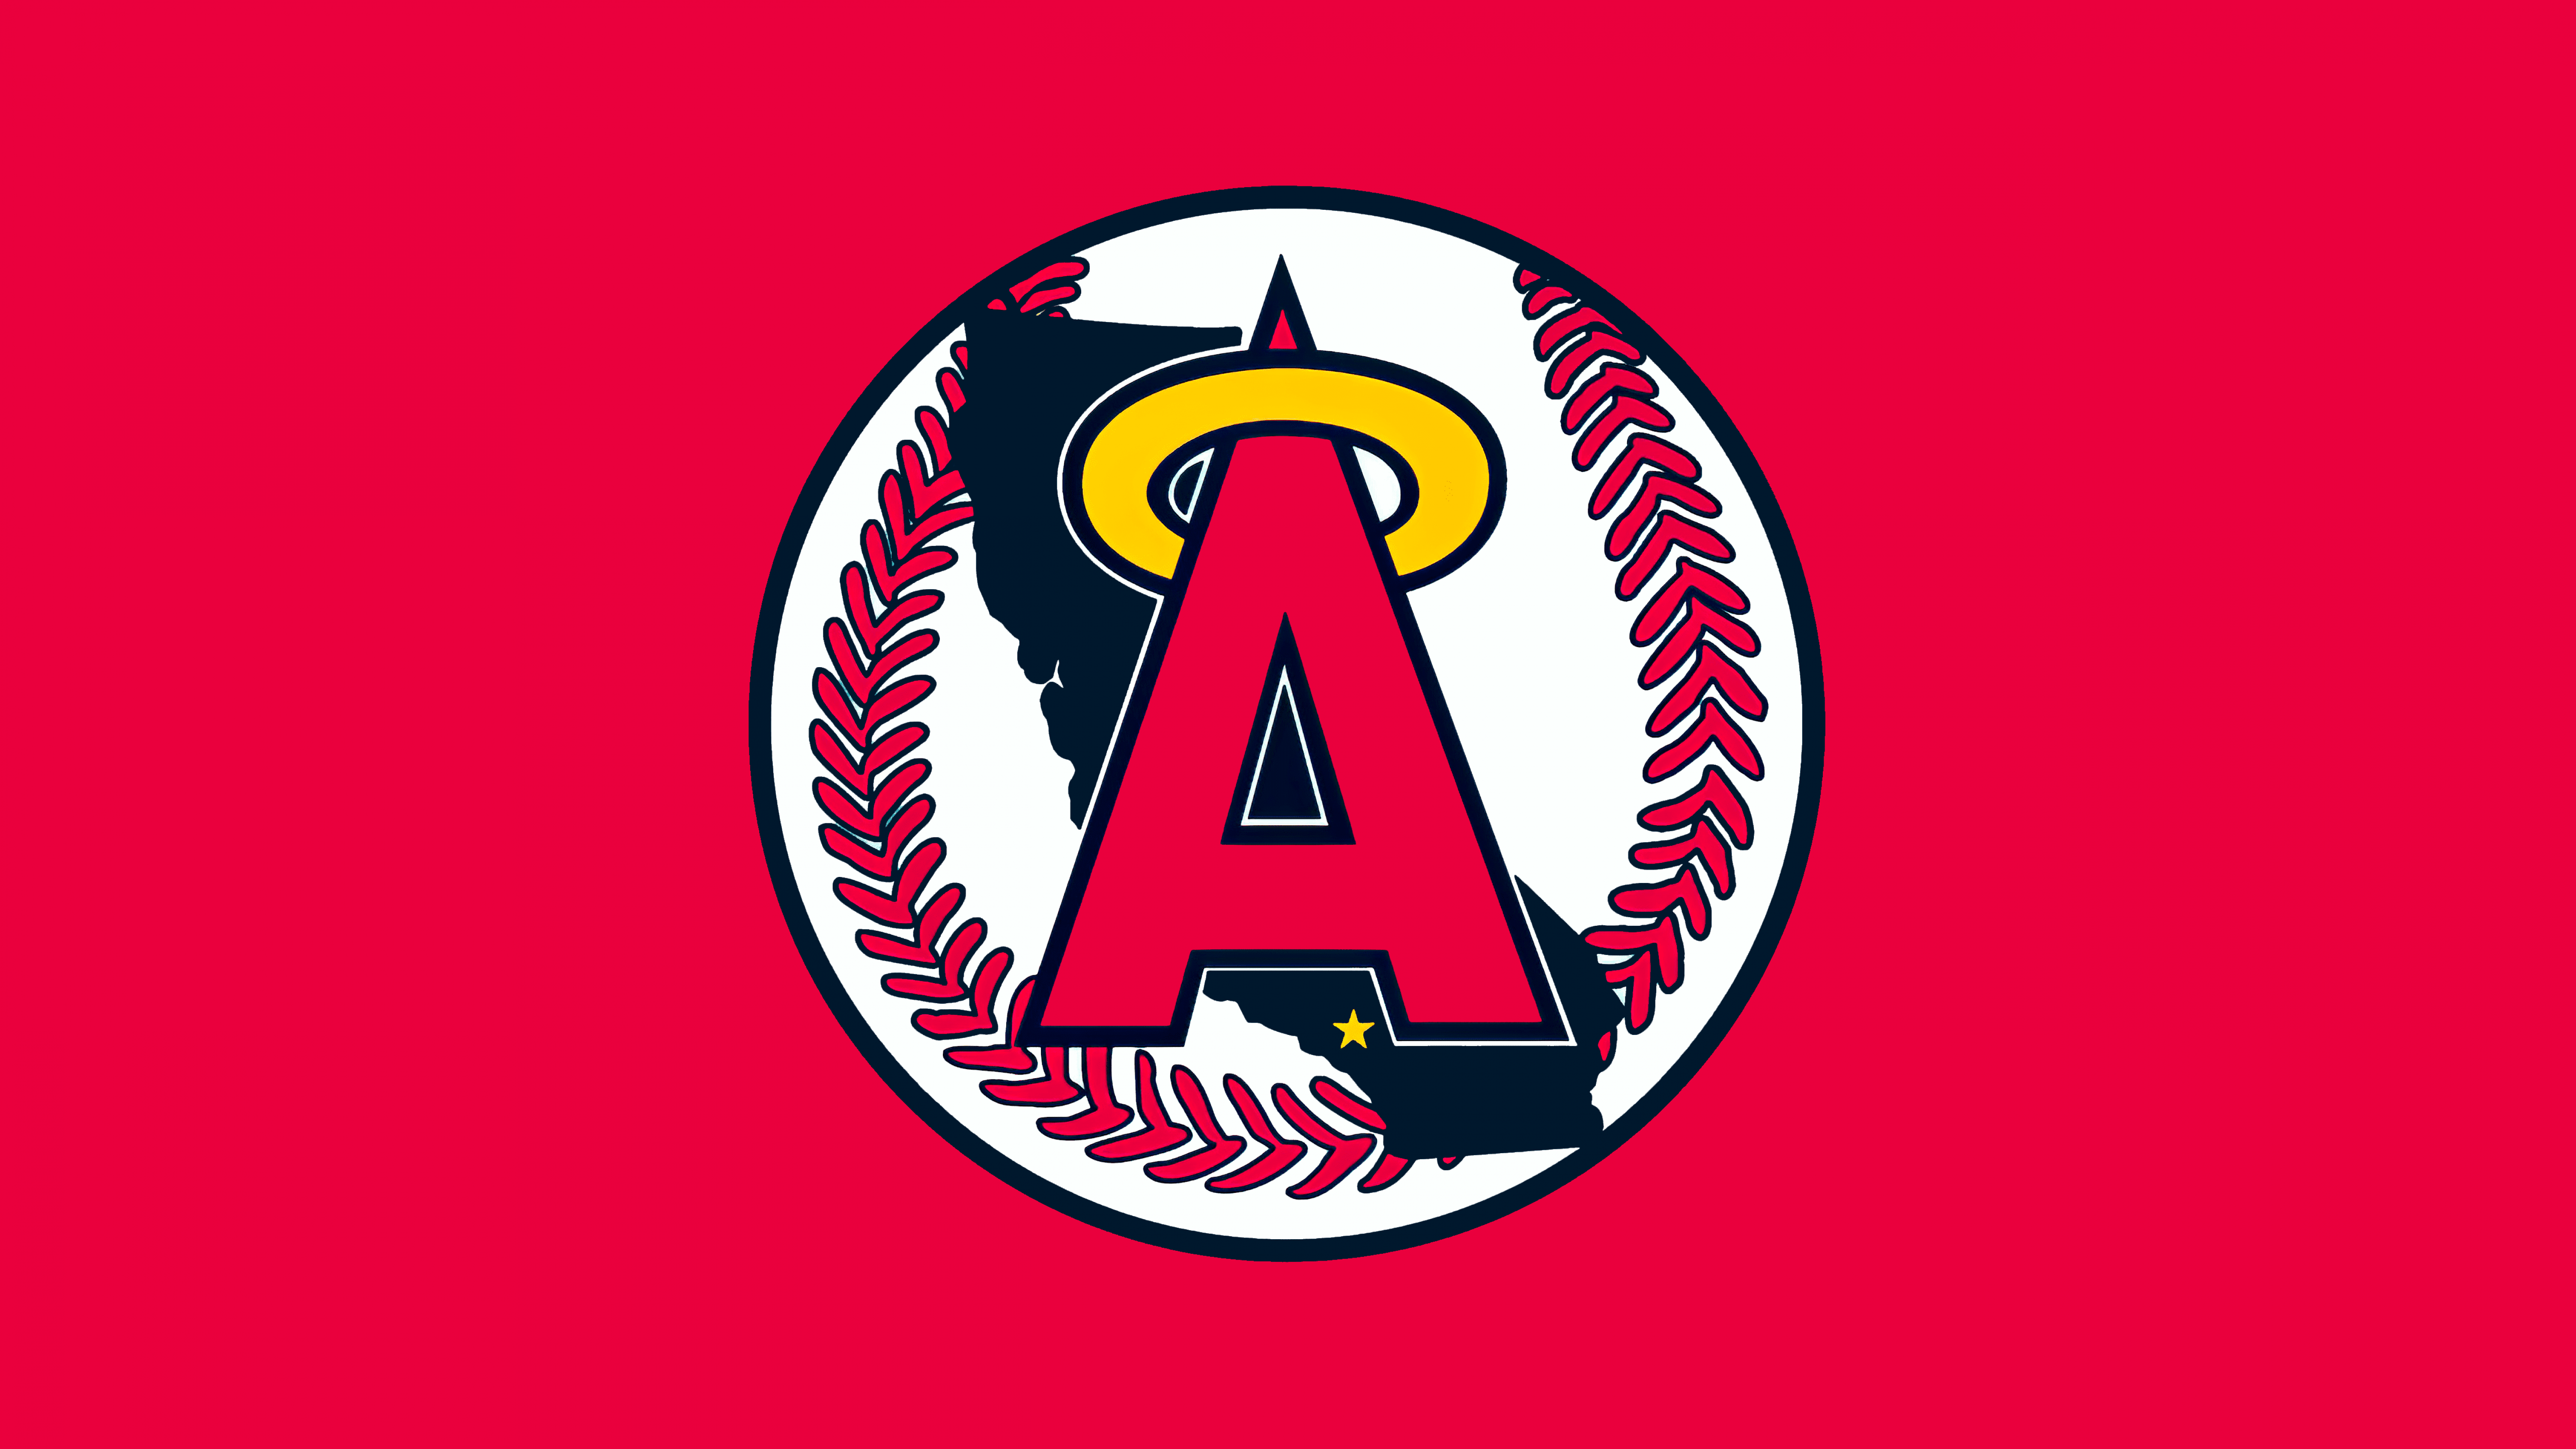 LOS ANGELES ANGELS - Wallpaper for cell phone + computer